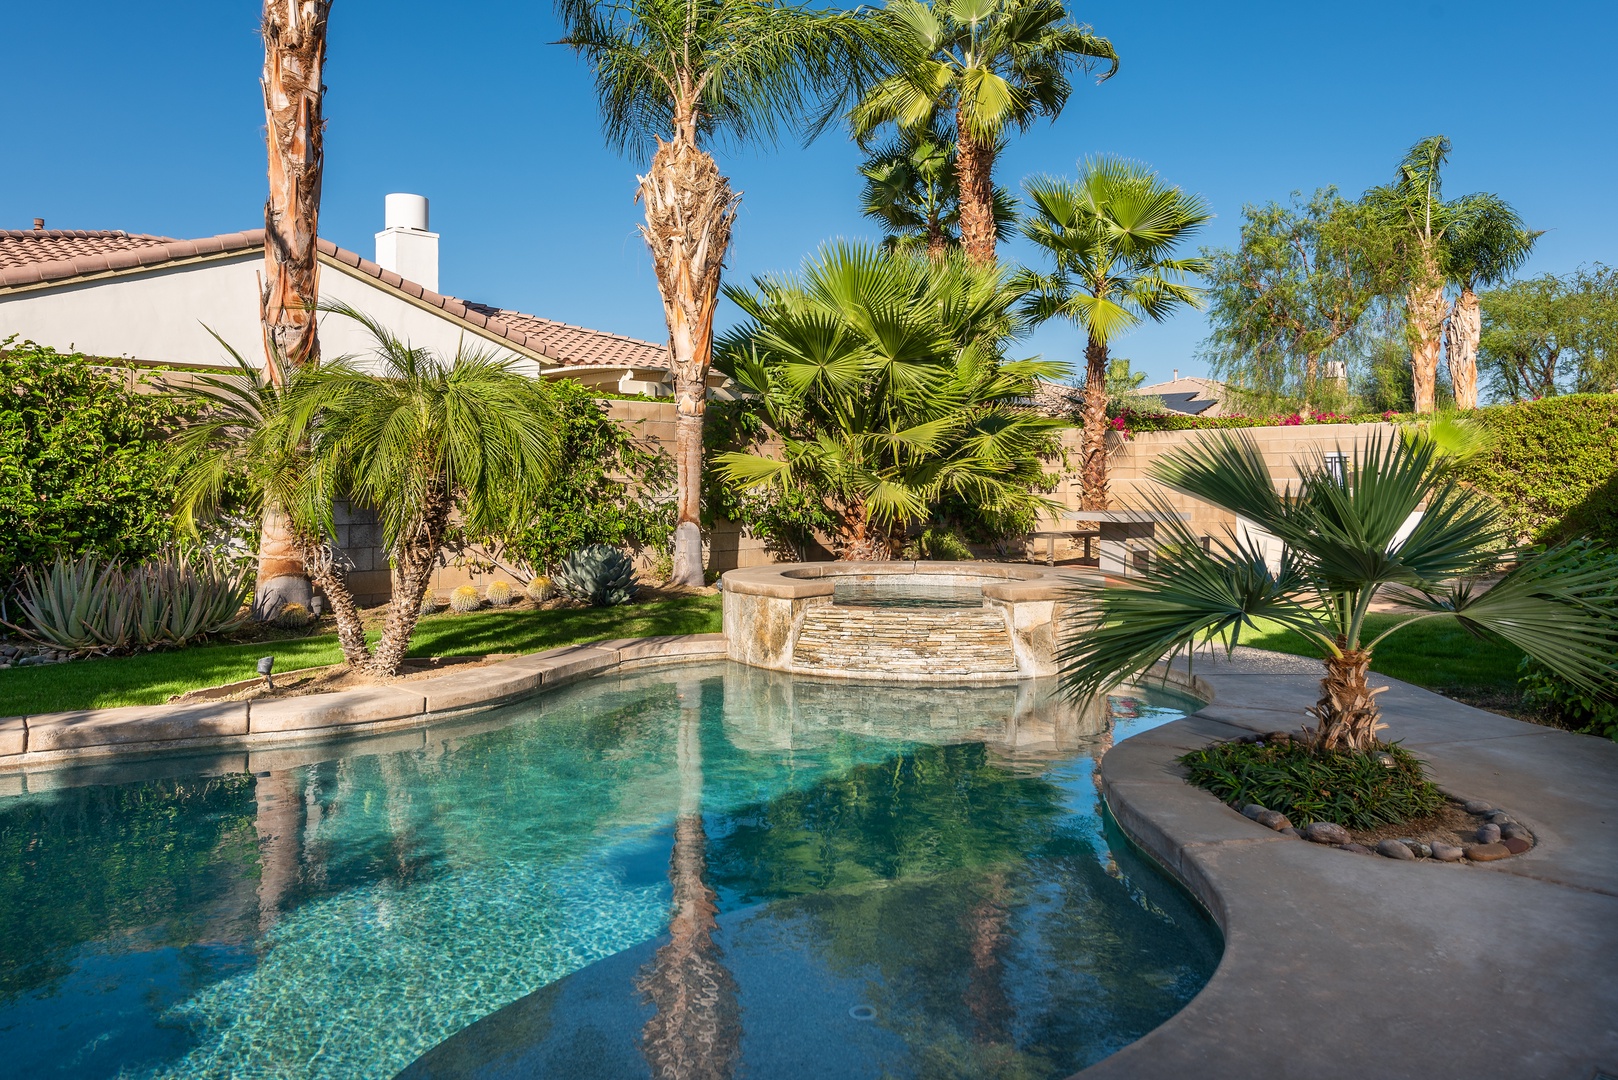 Pool & Spa with Desert Landscaping